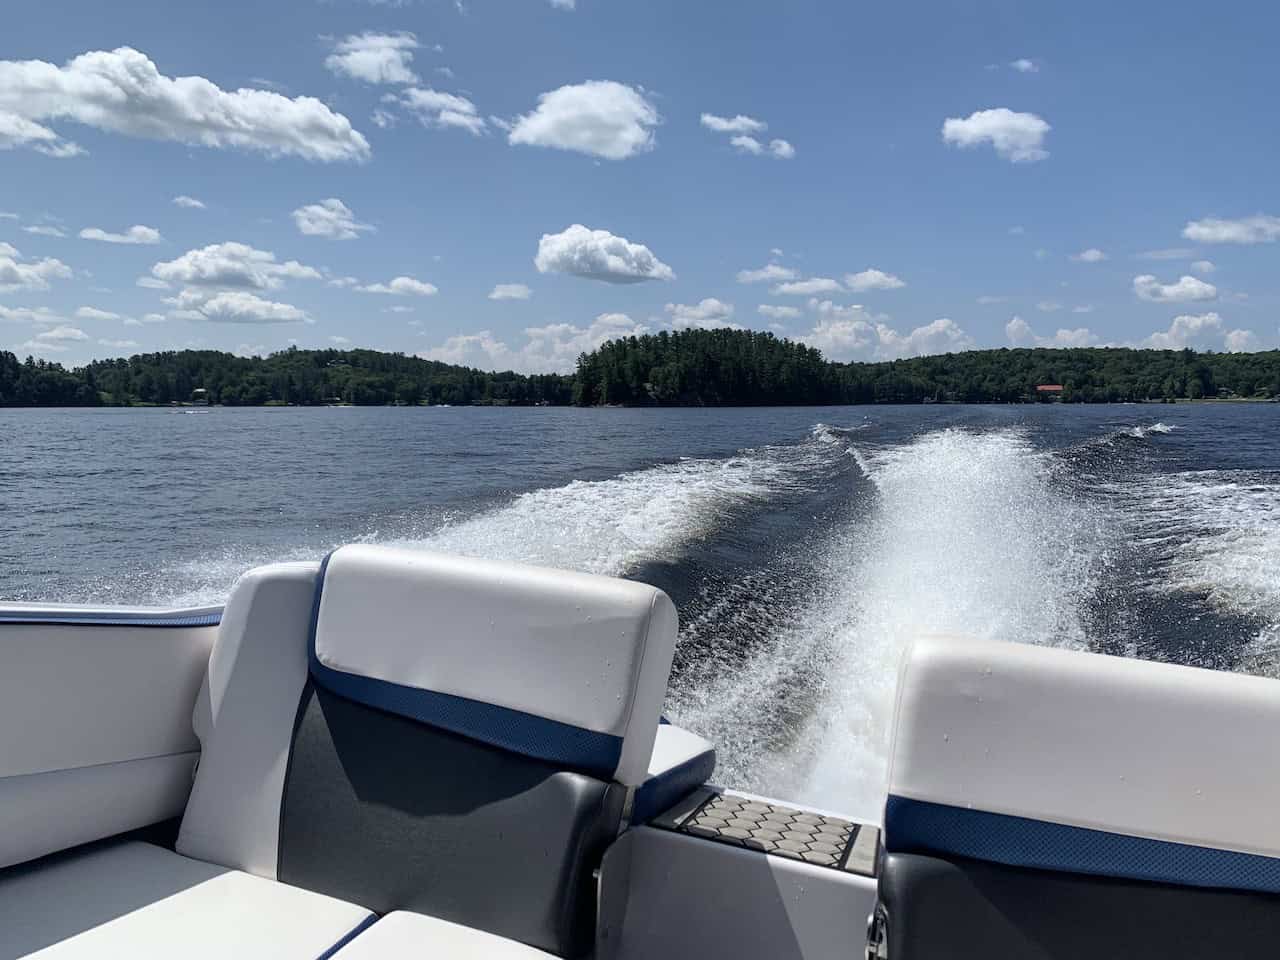 Boating on Mary Lake in Huntsville Ontario - Mary Lake is a beautiful spot to enjoy a day enjoying activities on the water in Huntsville, Ontario, Canada.